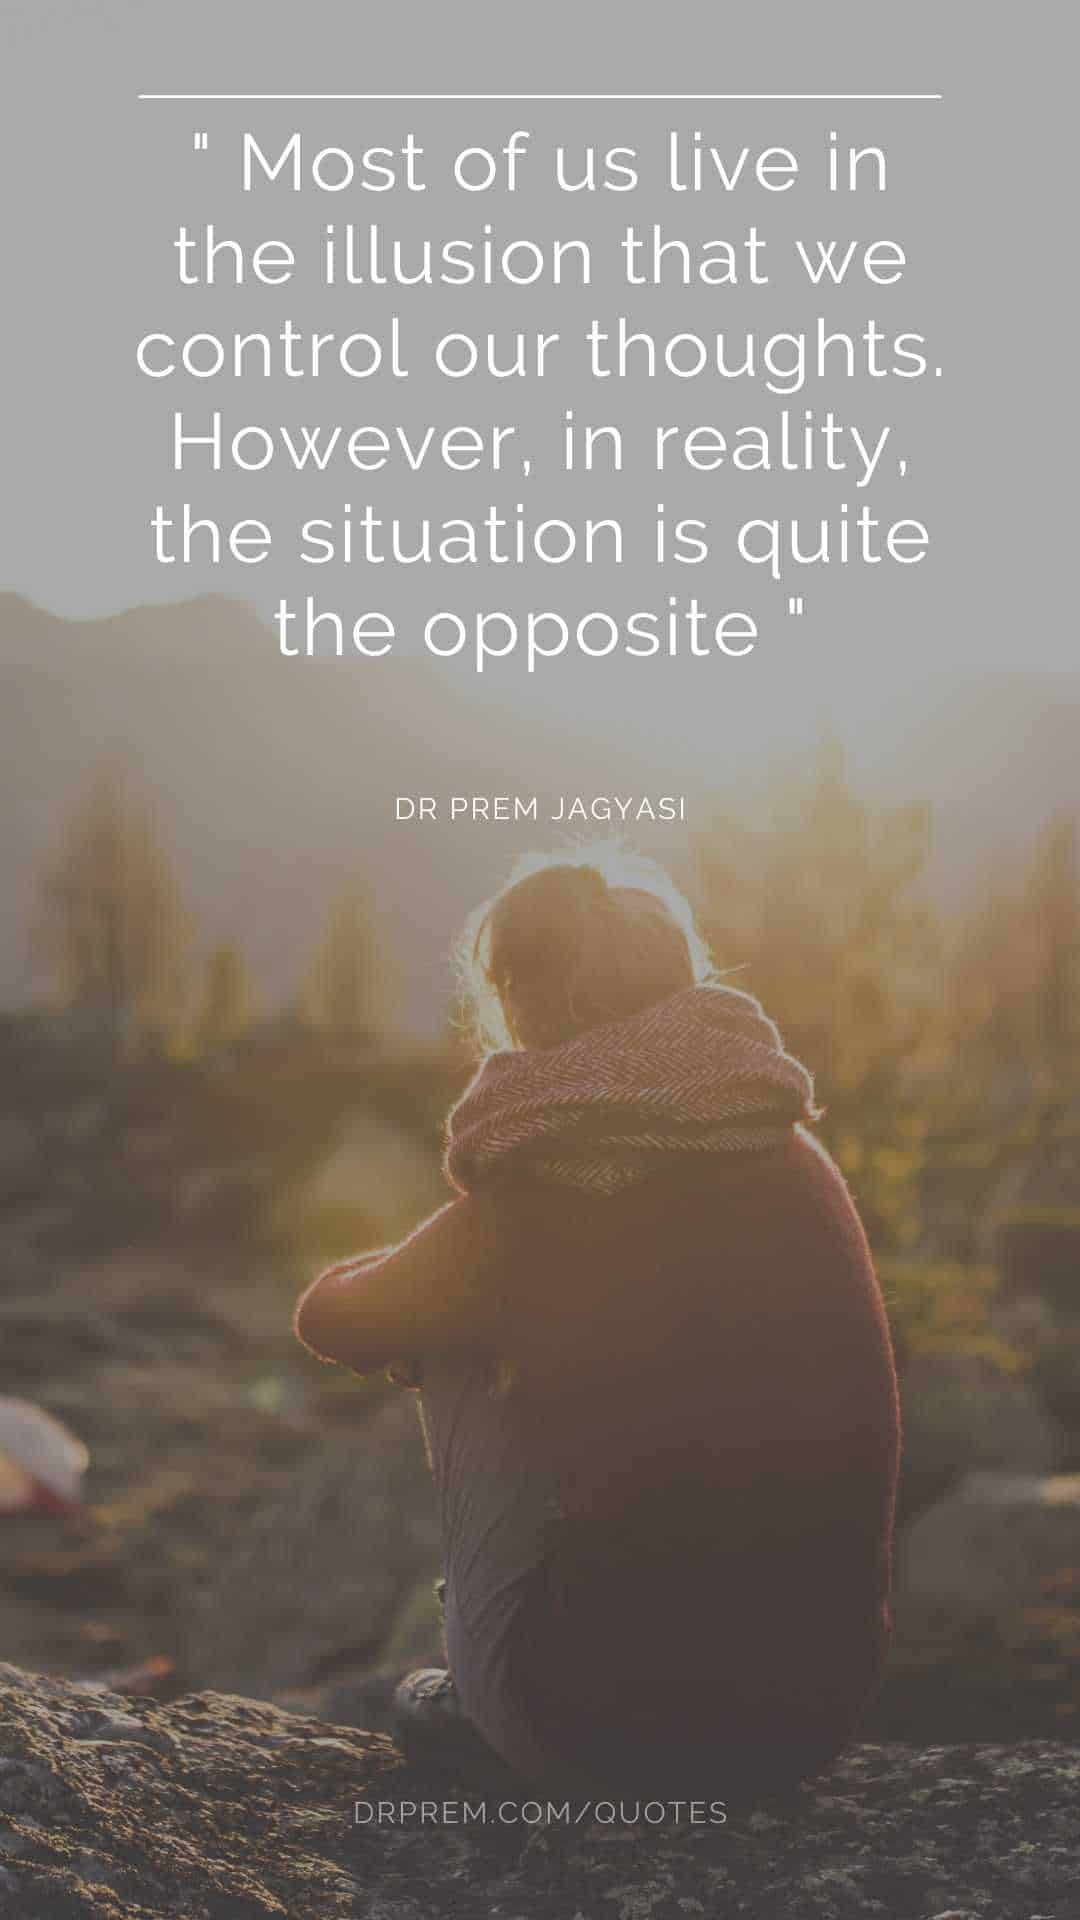 Most of us live in the illusion that we control our thoughts. However, in reality, the situation is quite the opposite.